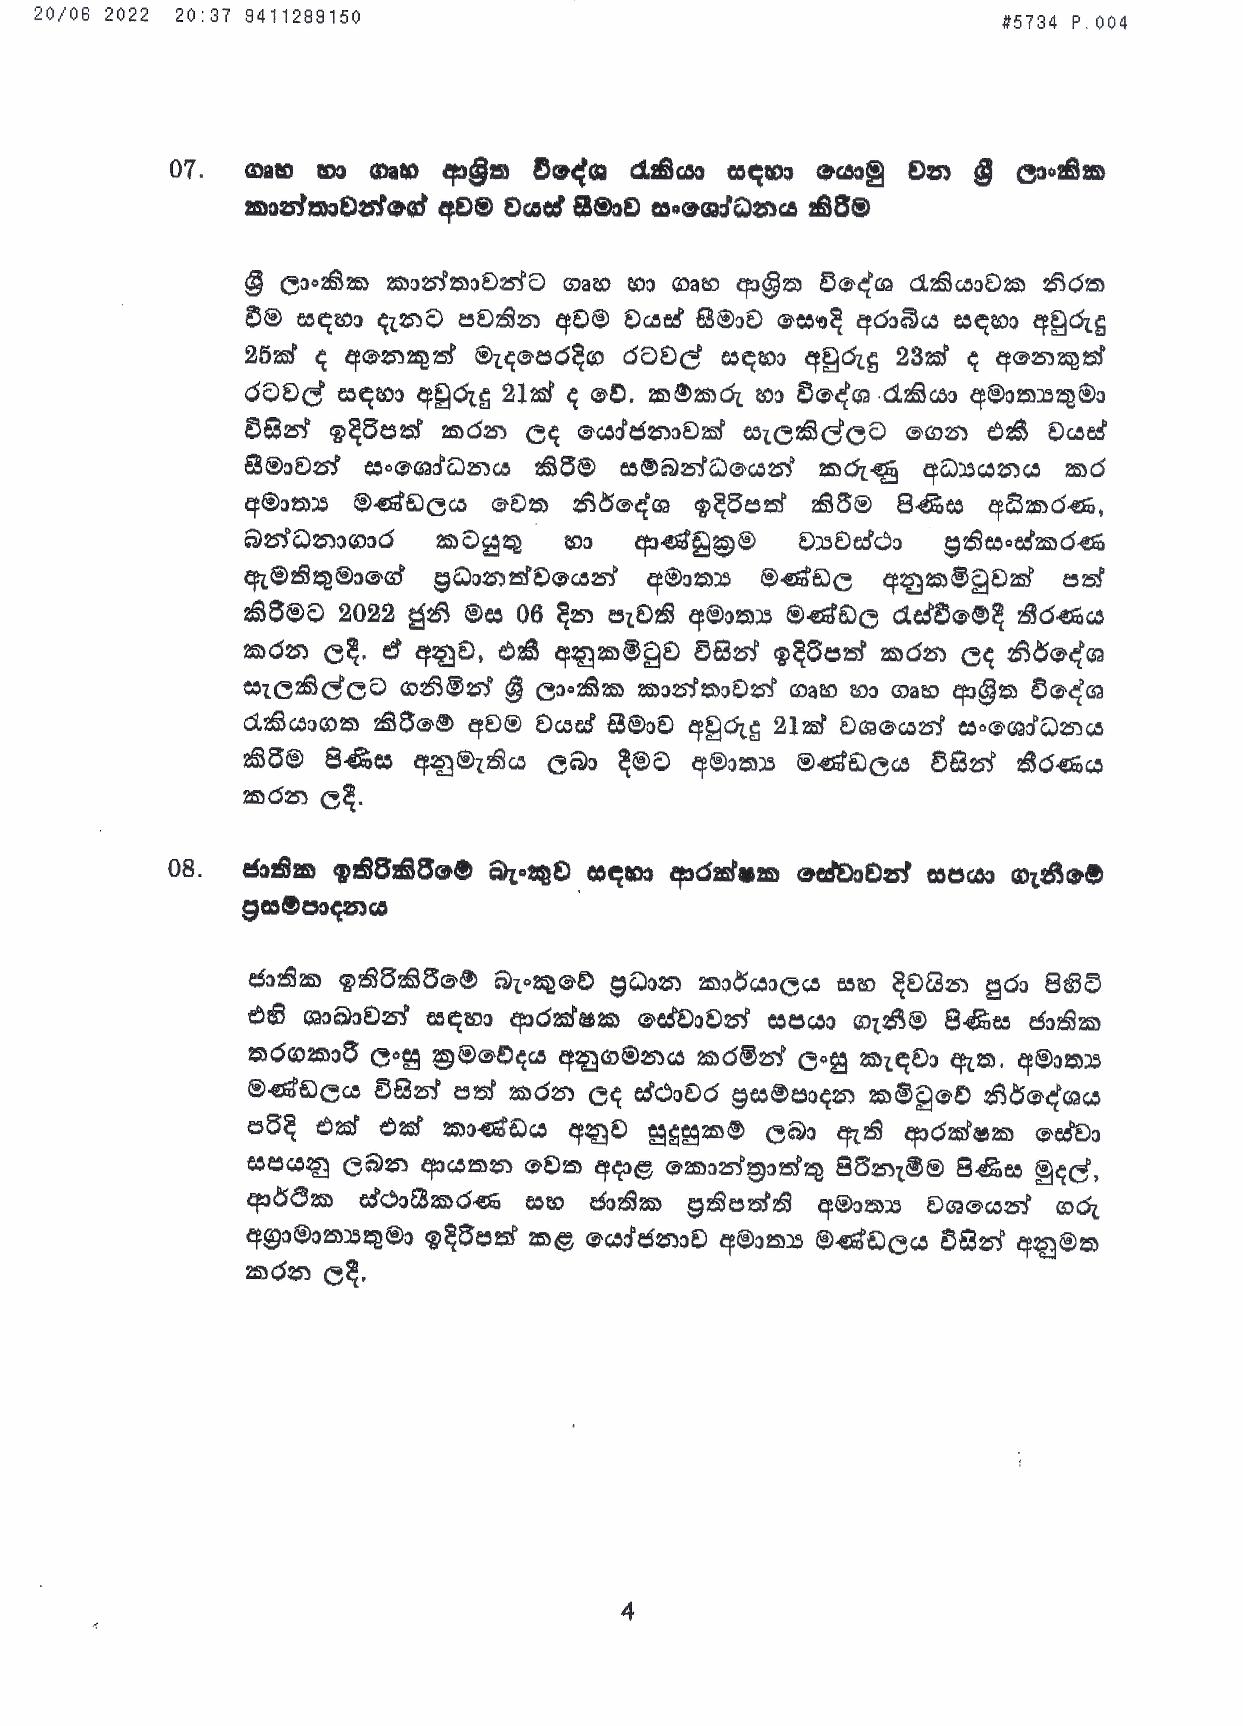 Cabinet Decision on 20.06.2022 page 004